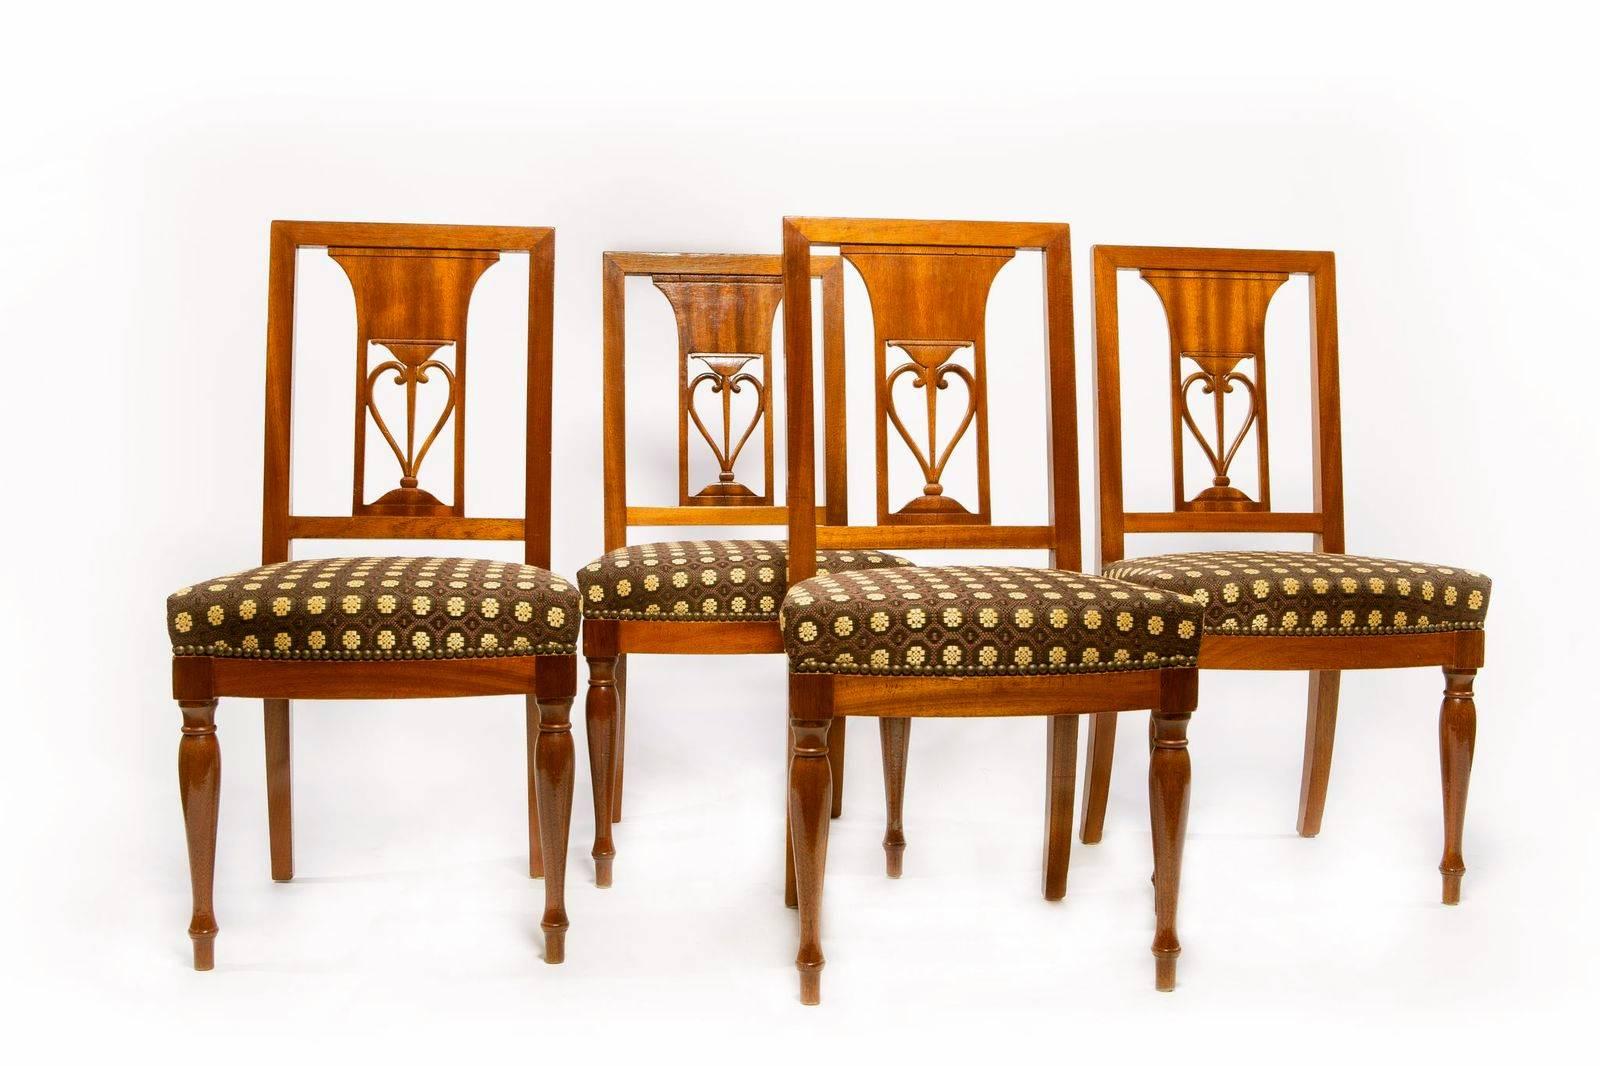 A fine set of 14 Empire mahogany dining chairs, a pair of arms and 12 sides, upholster in a brown French horse hair fabric with a gold colored medallions with a nailhead trim. The chairs having a center design to the back with a simple seat real